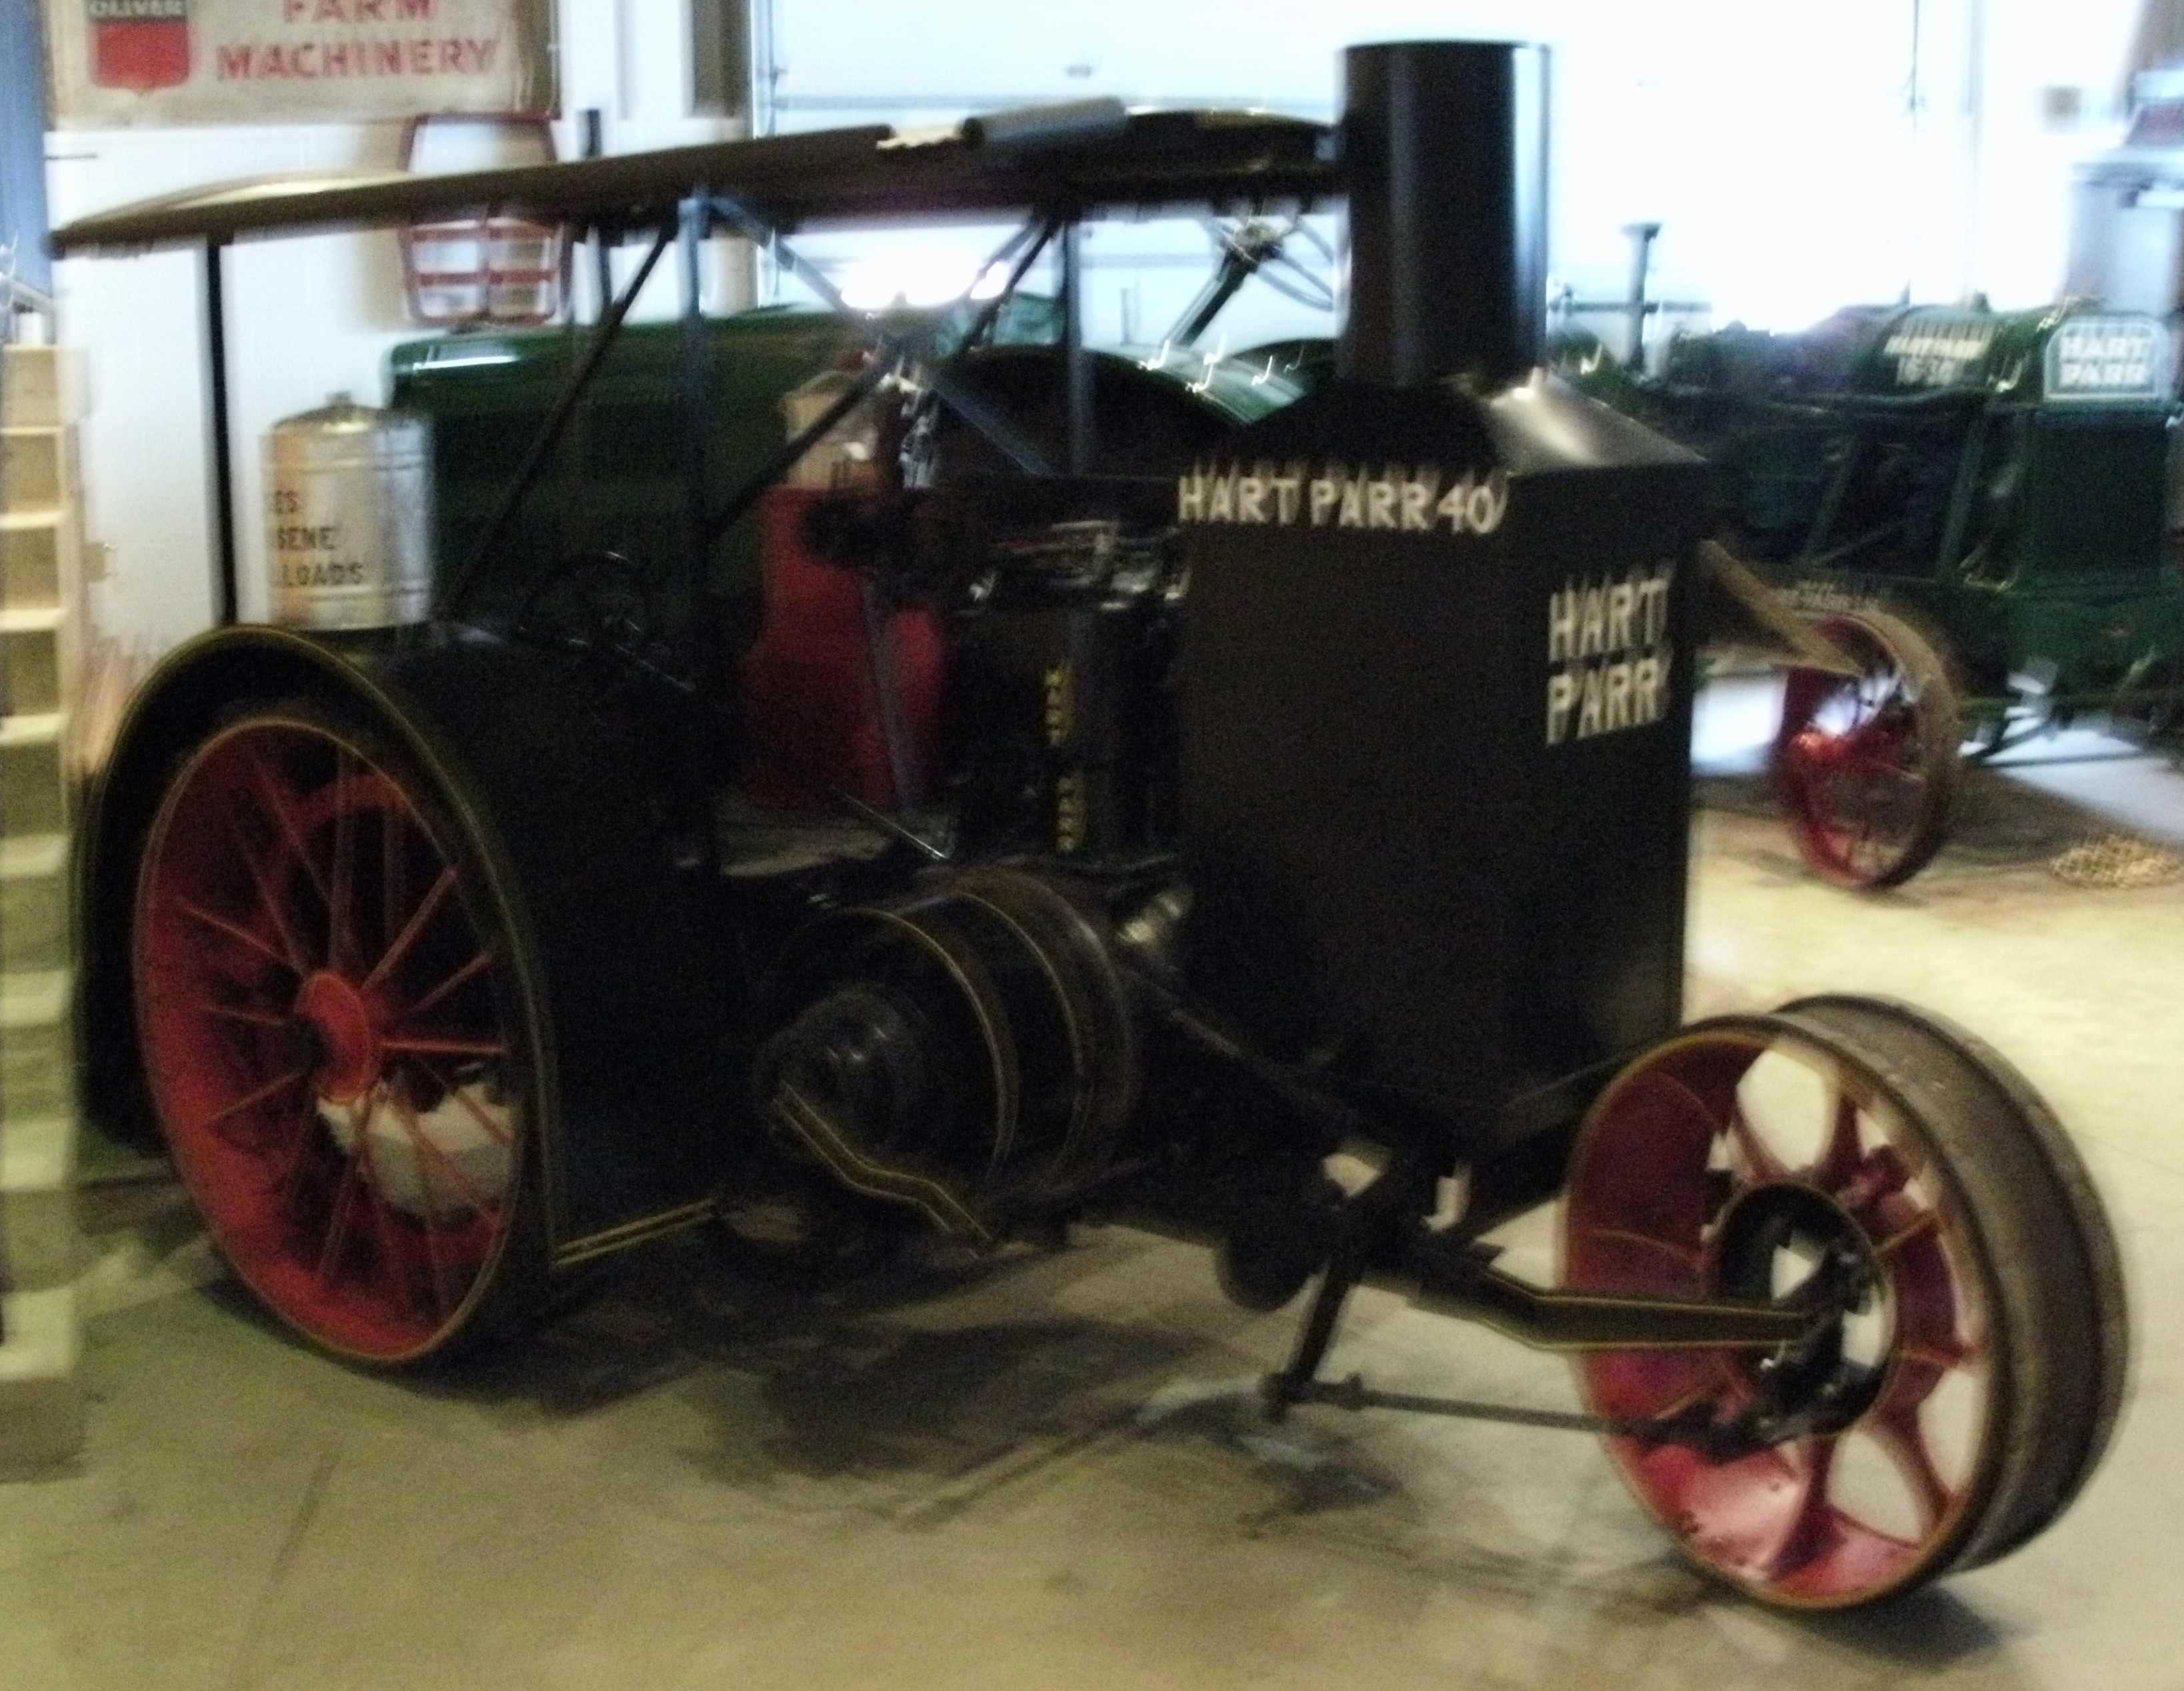 File:HART-PARR tractor 40 one third scale model pic 2.jpg - Wikimedia ...